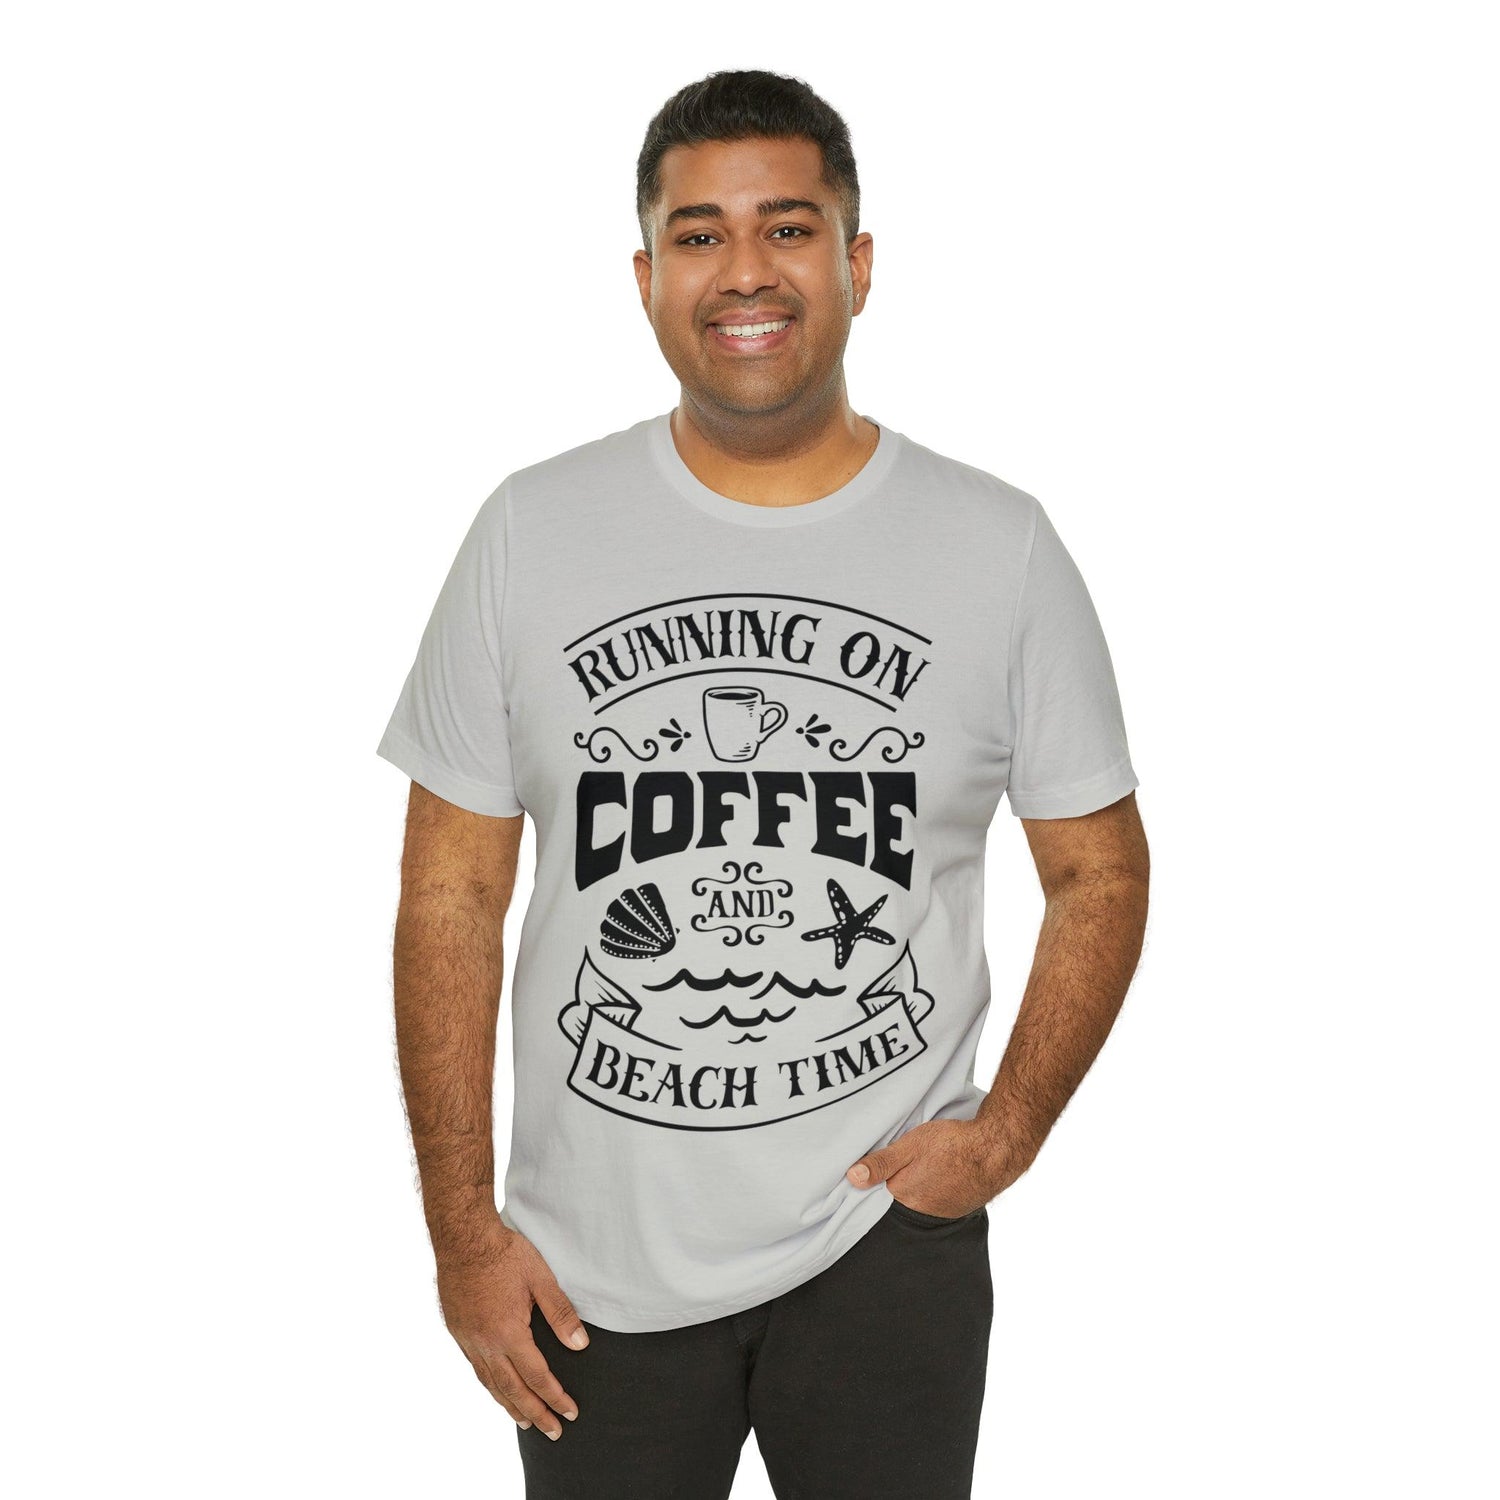 Running on Coffee and Beach Time Unisex Jersey Short Sleeve Tee